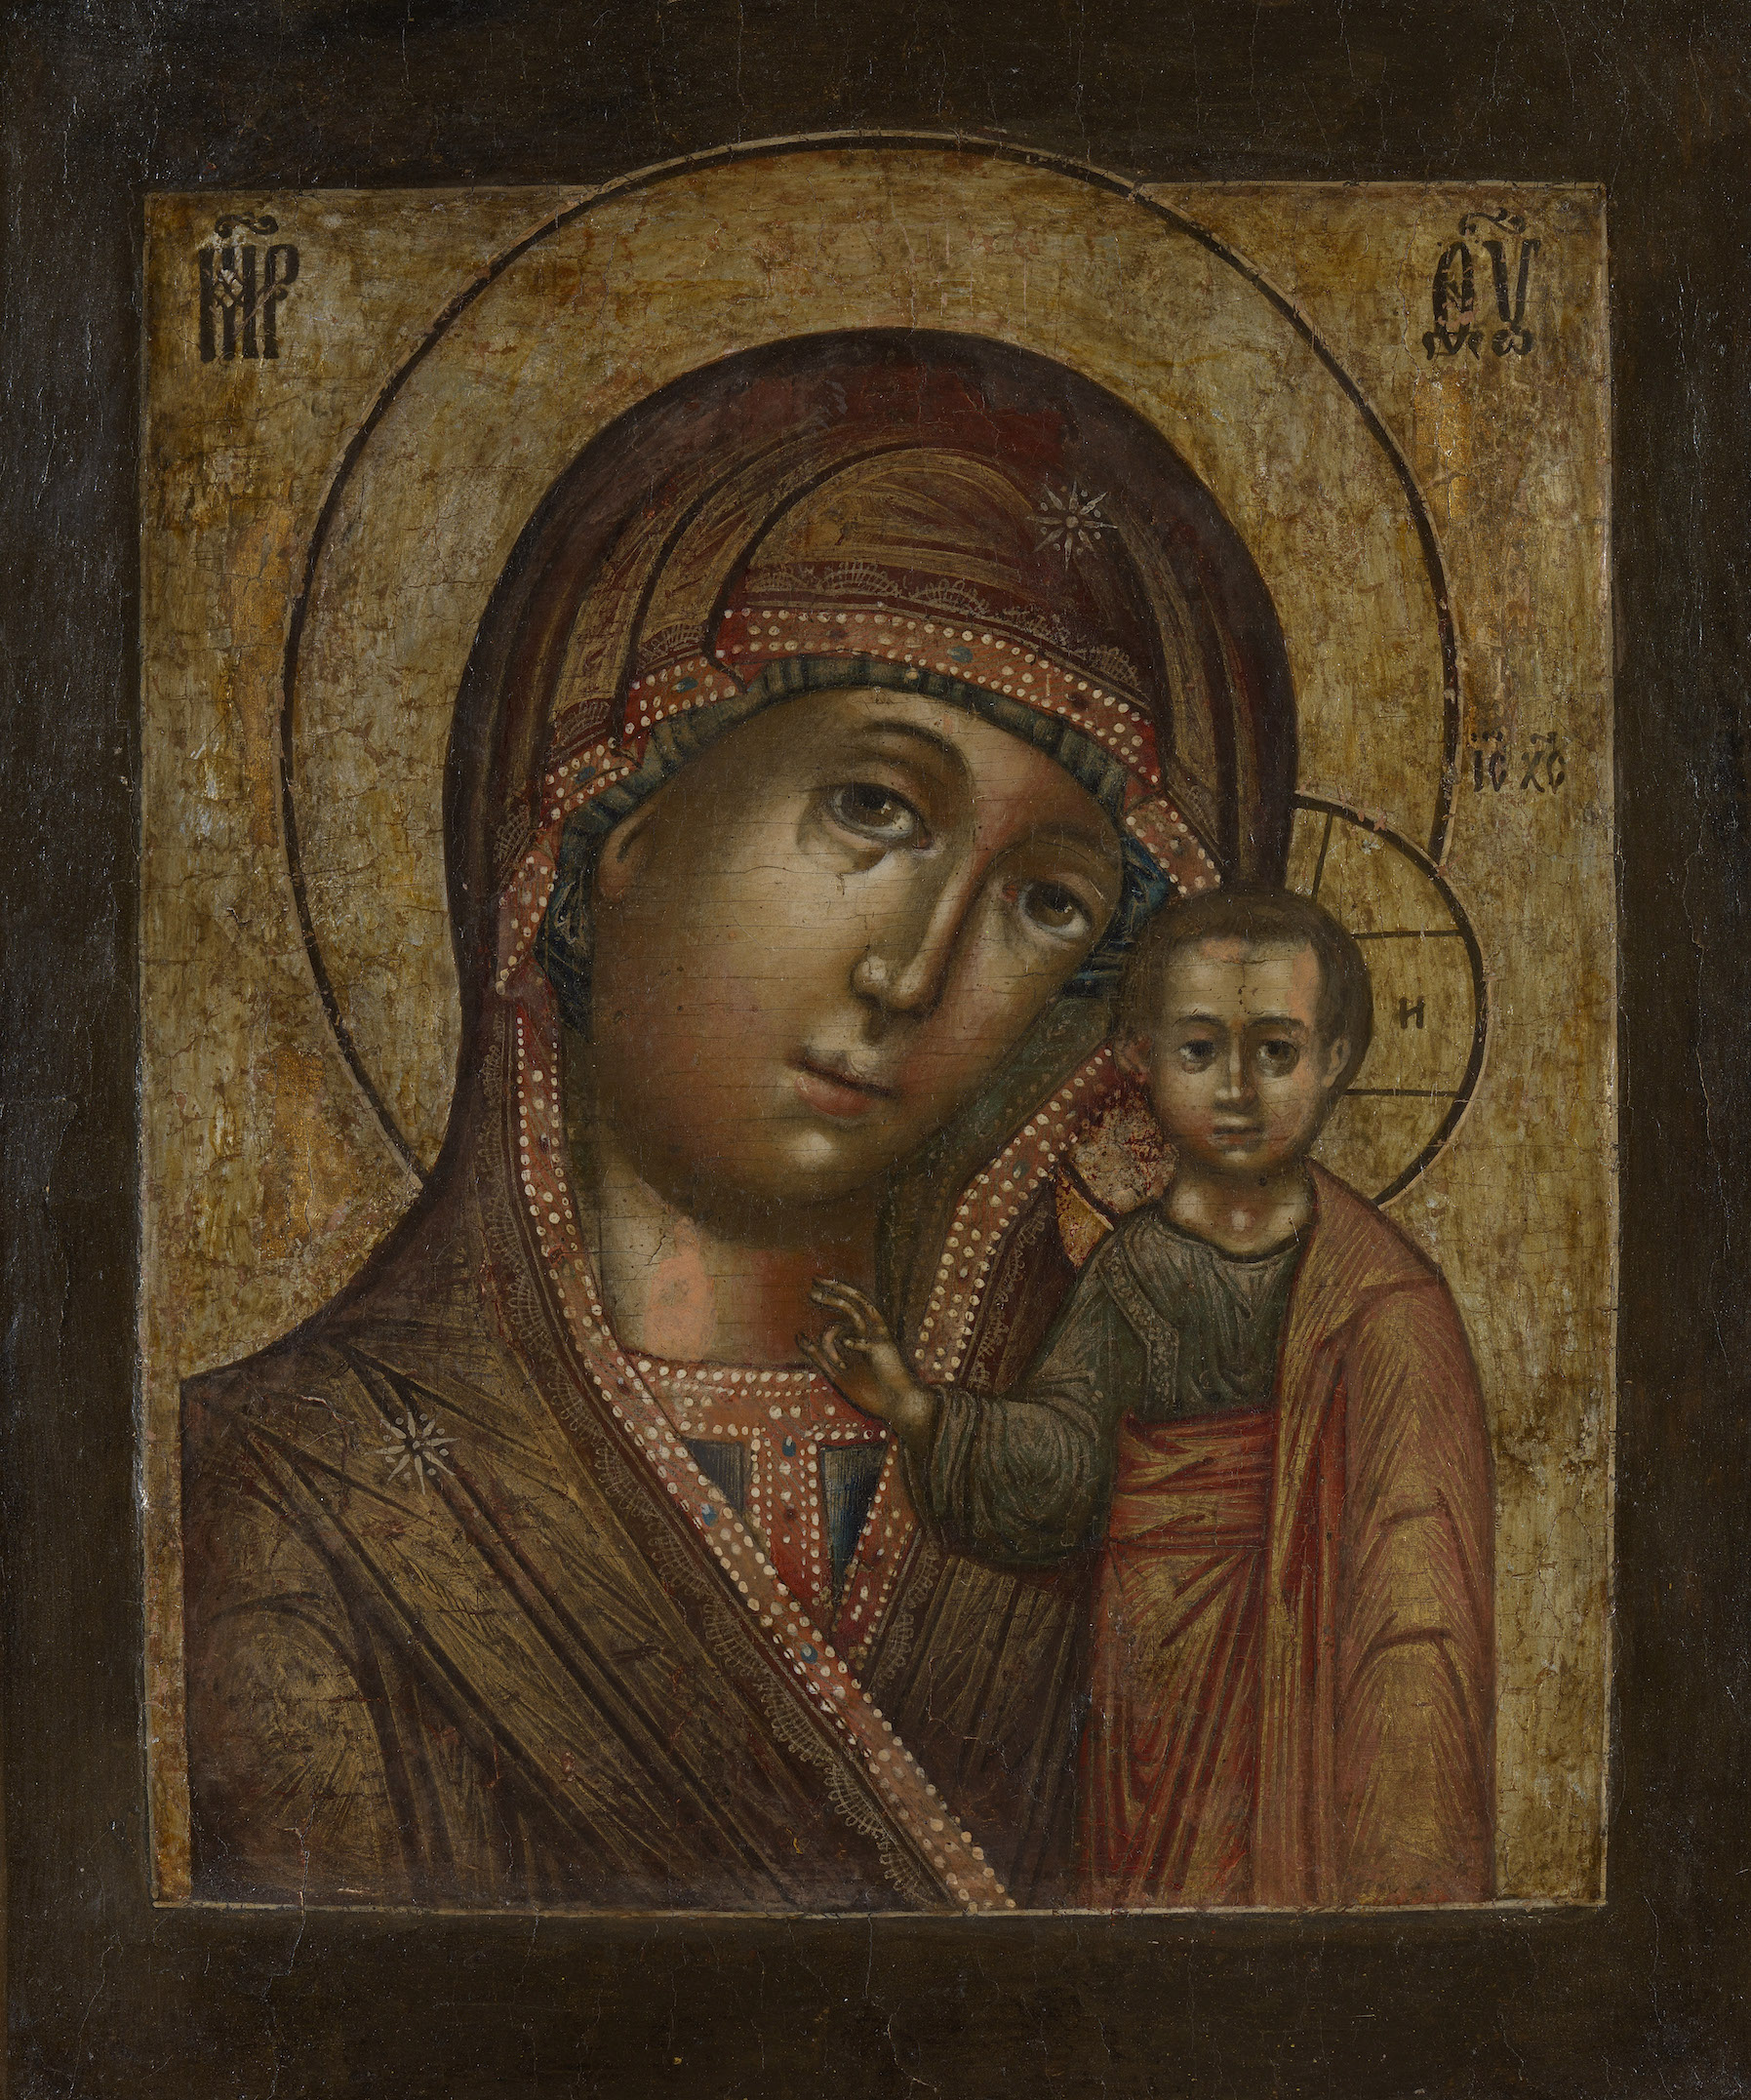 AN ICON OF THE KAZAN MOTHER OF GOD, RUSSIAN, END OF THE 17TH CENTURY